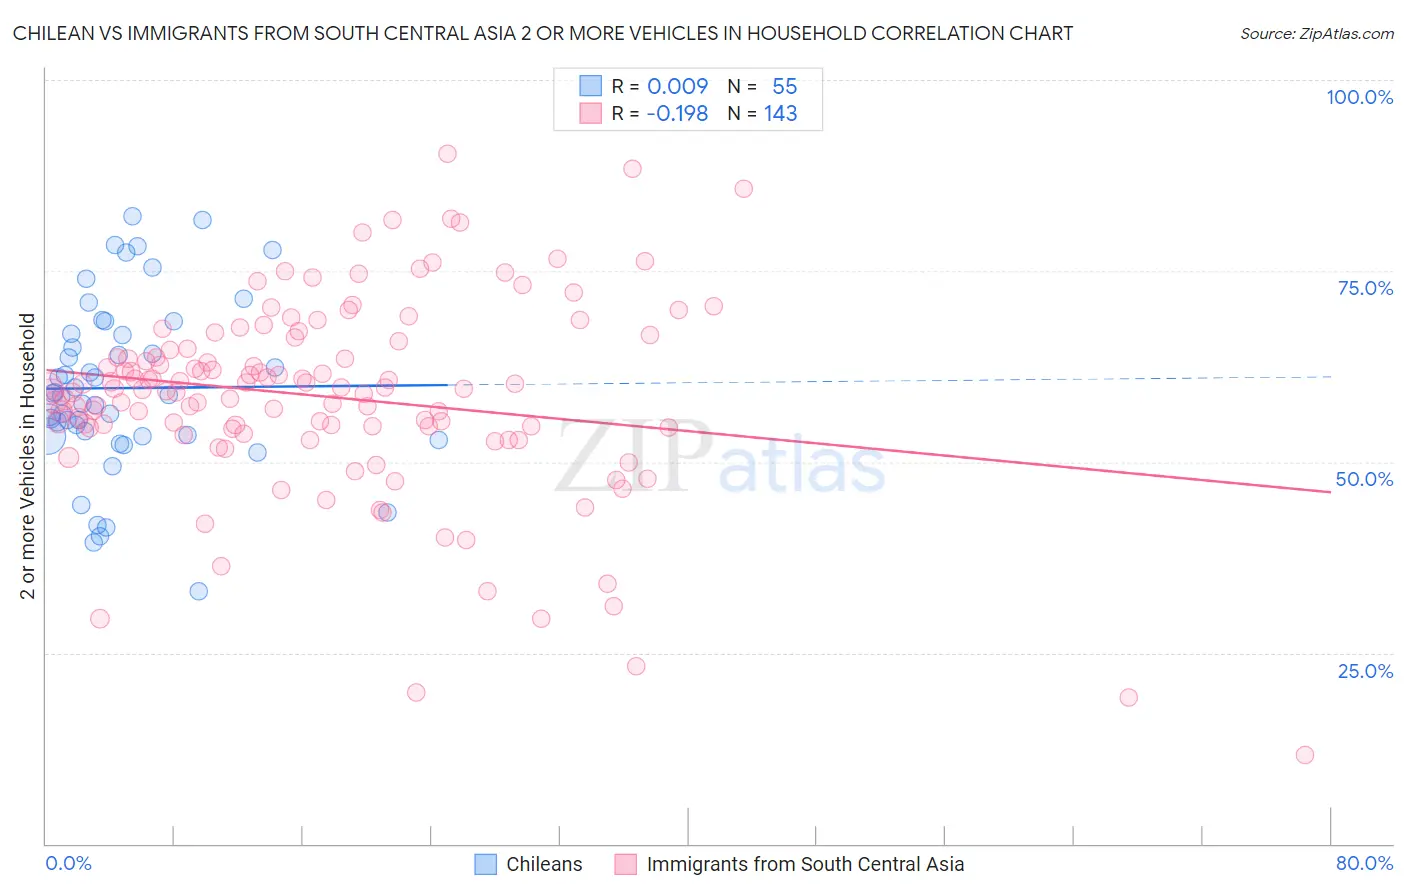 Chilean vs Immigrants from South Central Asia 2 or more Vehicles in Household